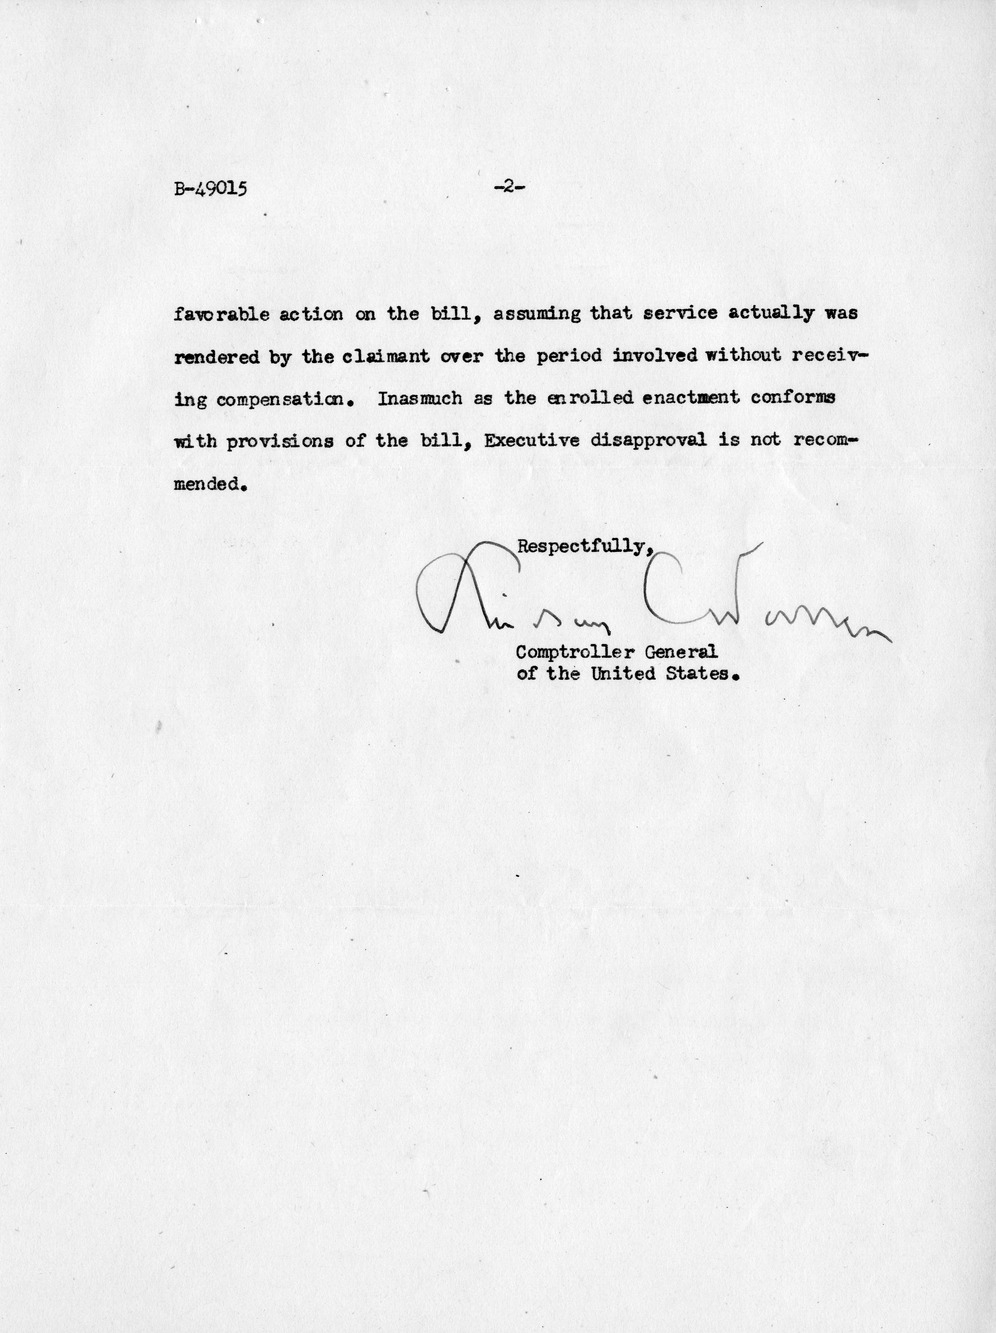 Memorandum from Frederick J. Bailey to M. C. Latta, H.R. 2748, For the Relief of the Dubuque and Wisconsin Bridge Company, with Attachments